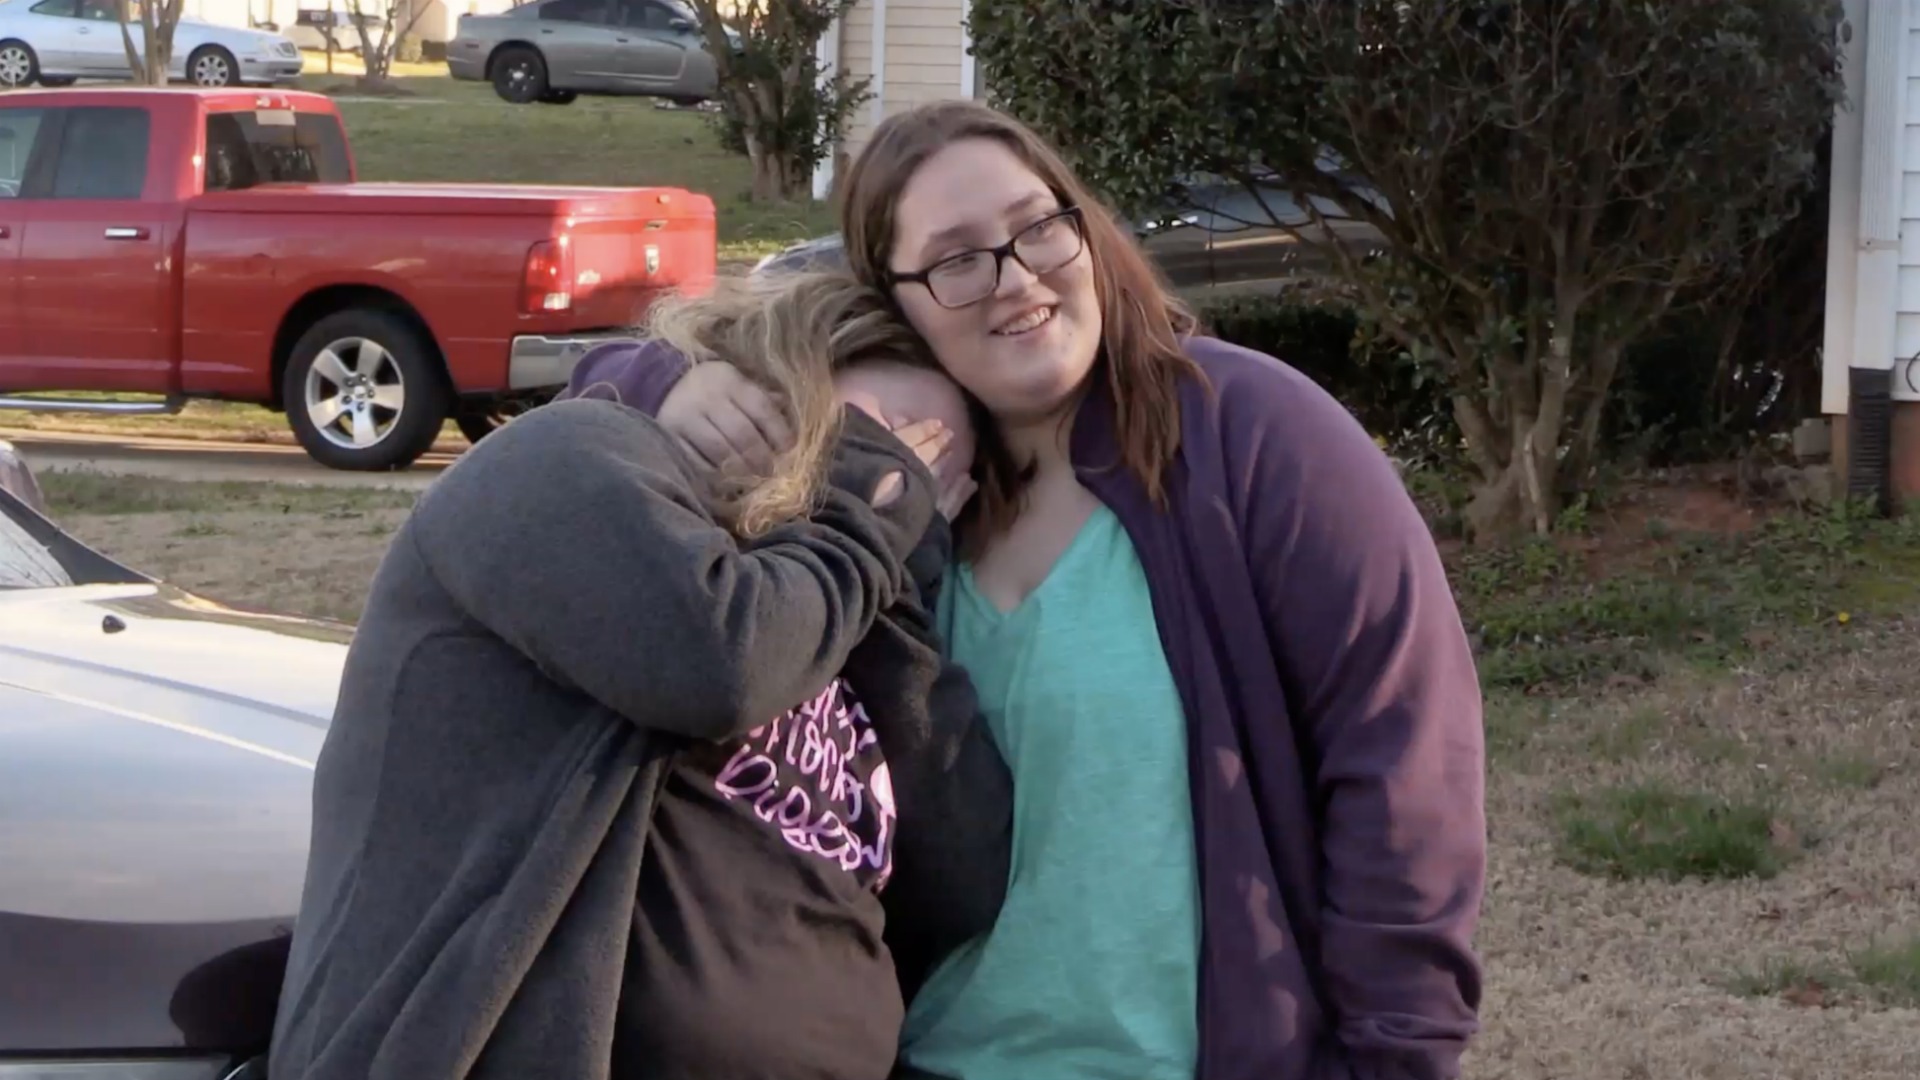 Watch #FamilyHealing Tip No. 7: Stay Hopeful! | Mama June: From Not to Hot Video Extras